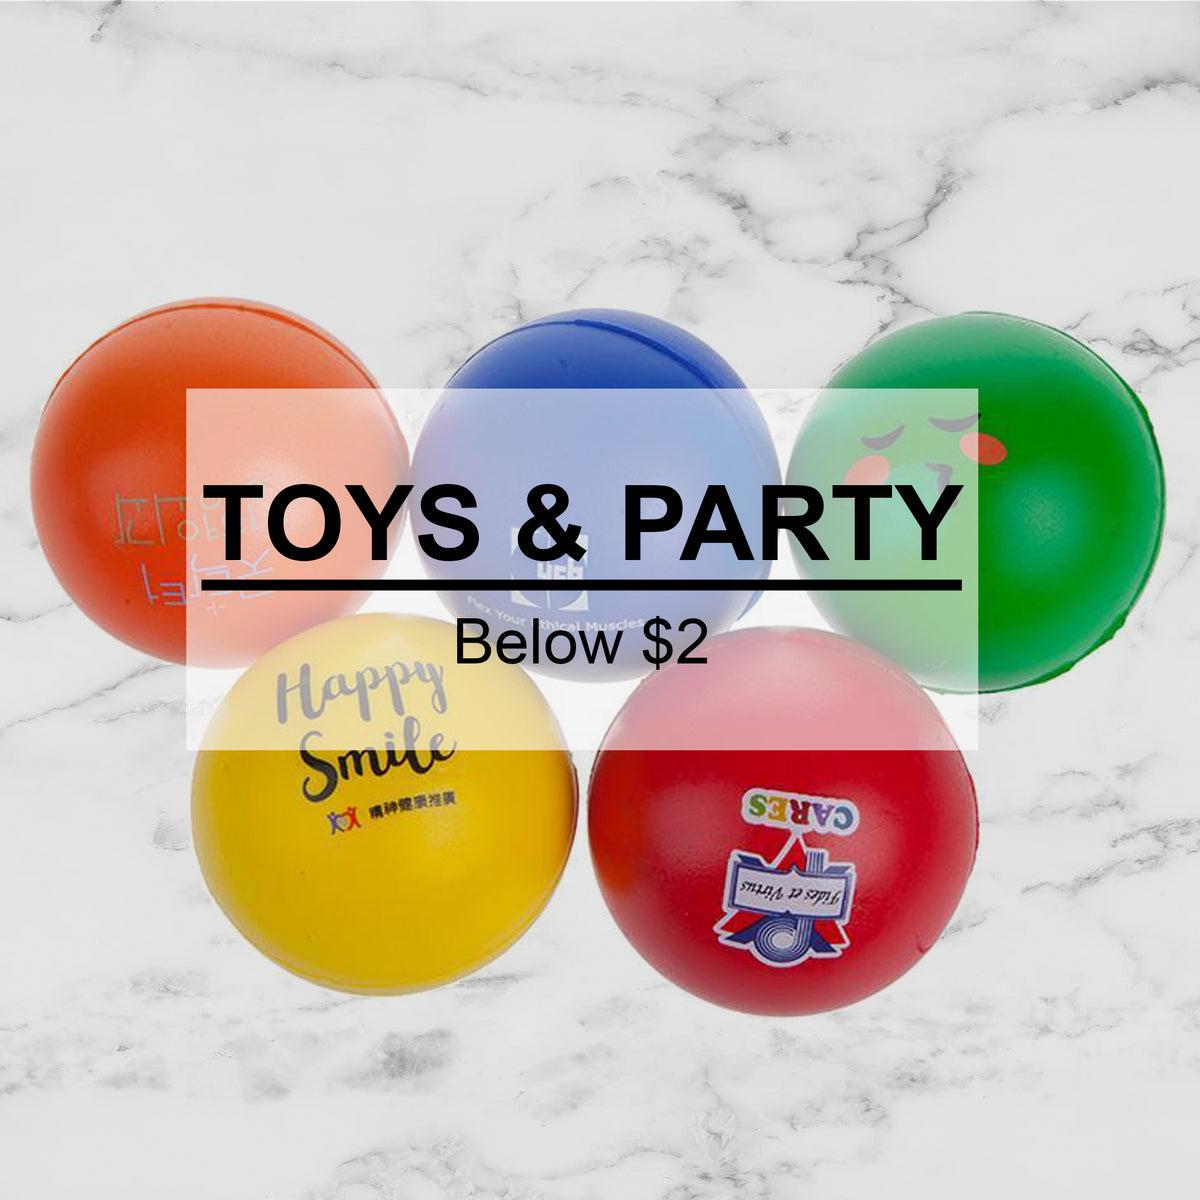 stressballs are great as toys and party gifts for cheap corporate gift